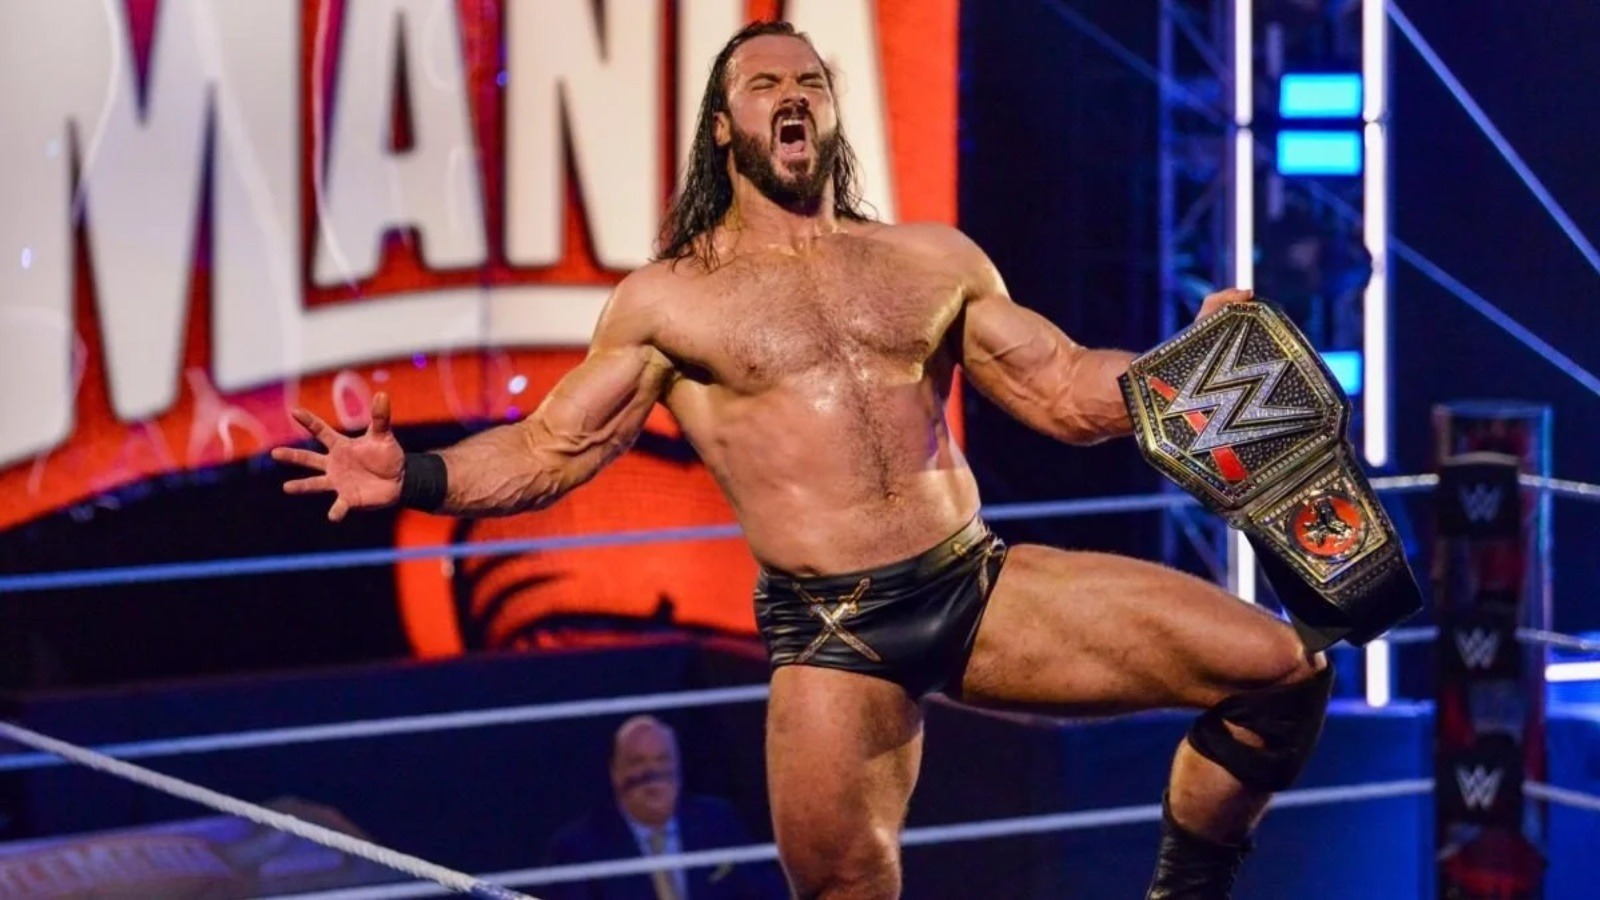 Matt Hardy Discusses Drew McIntyre Winning WWE Title During The Pandemic